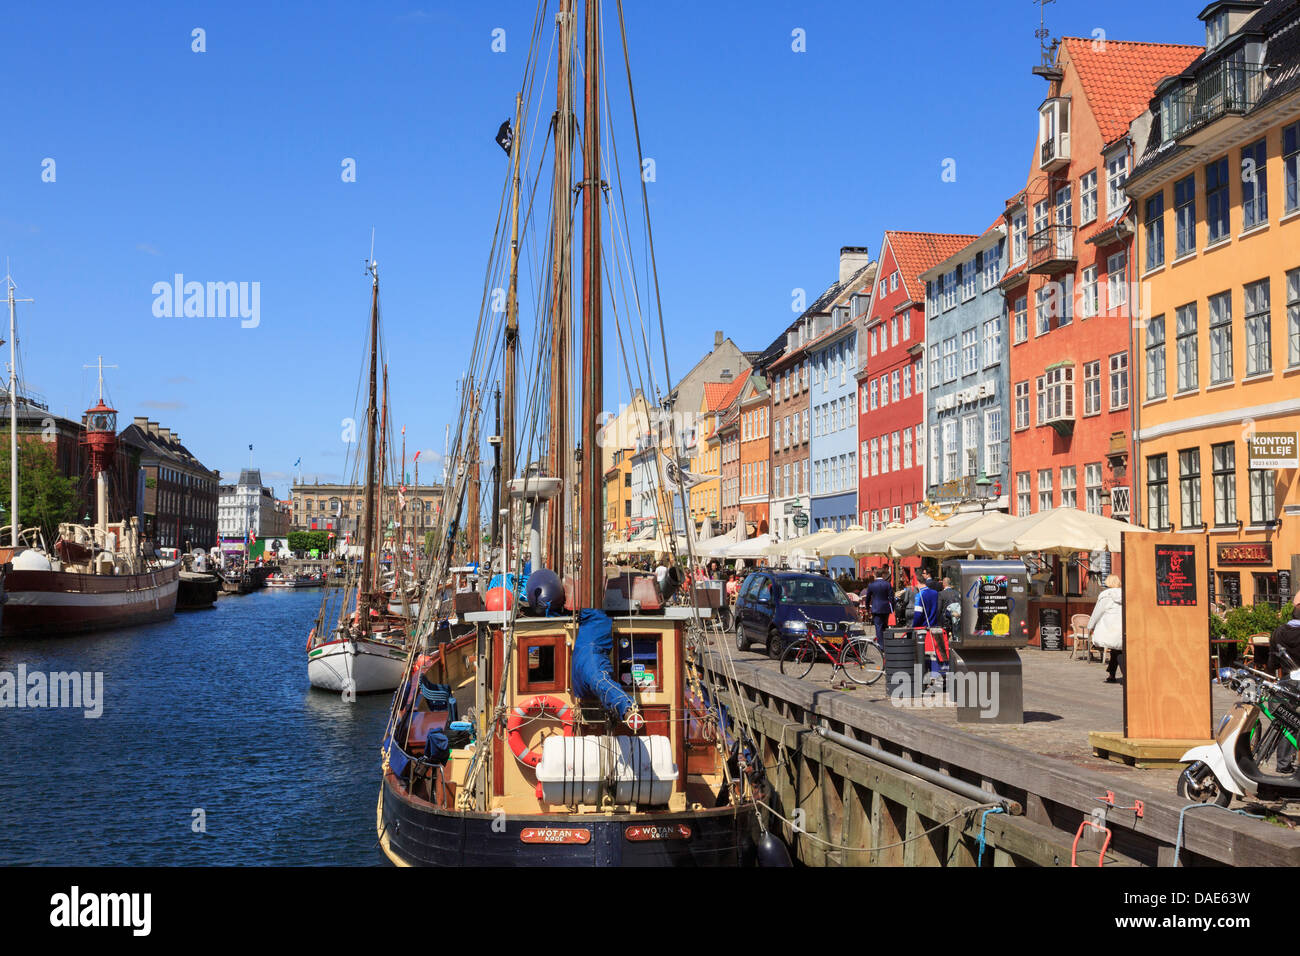 Old boats moored on canal with cafes and colourful buildings on 17th century waterfront in Nyhavn harbour Copenhagen Denmark Stock Photo